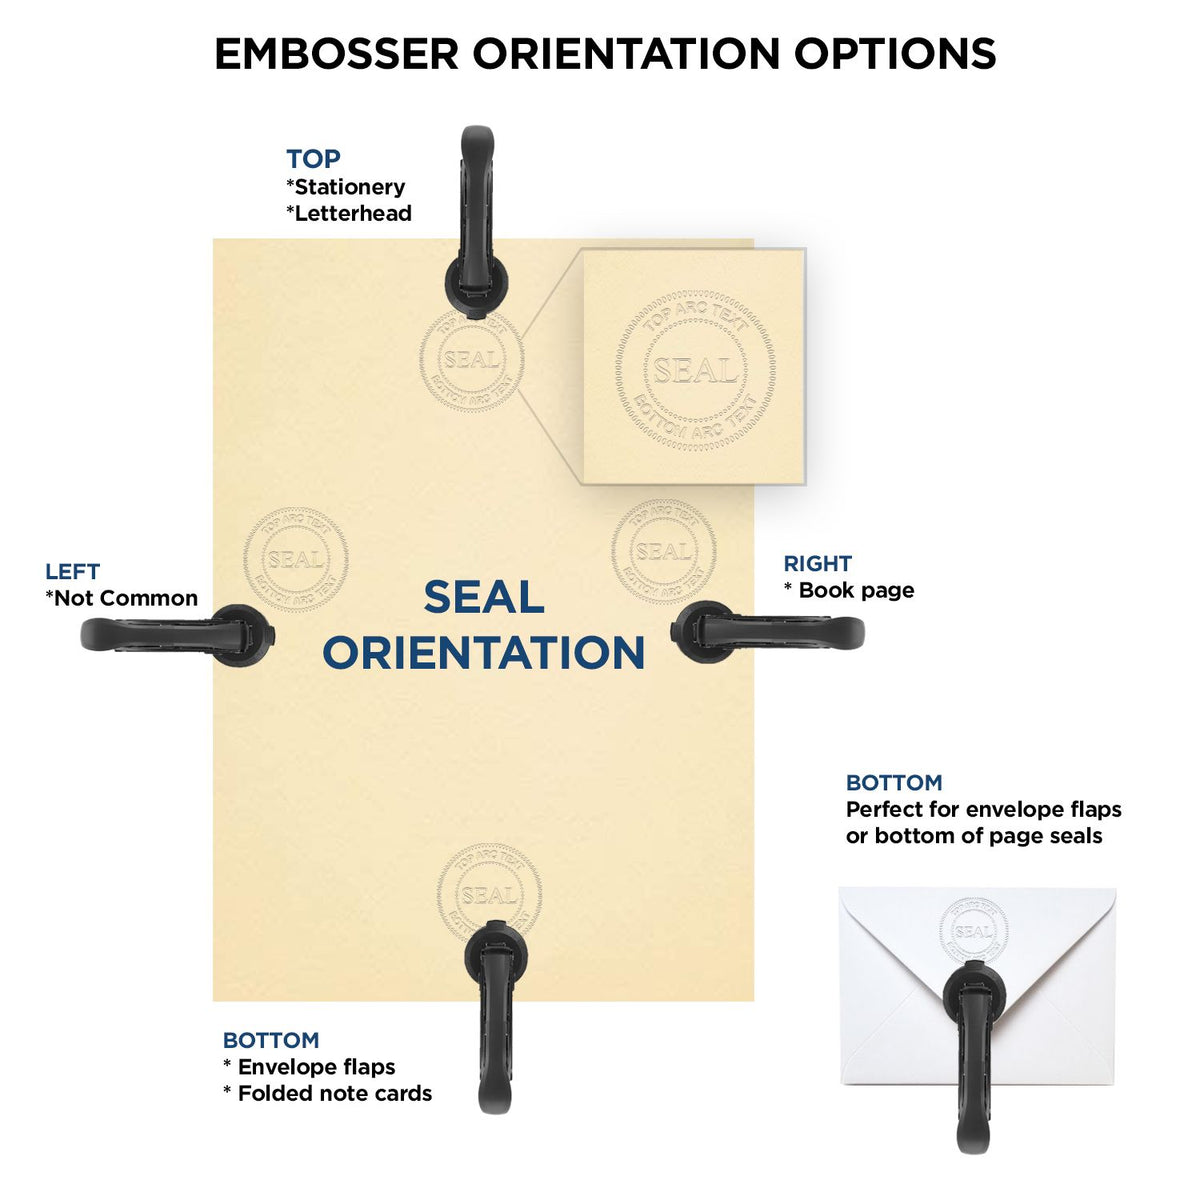 An infographic for the Extended Long Reach Missouri Surveyor Embosser showing embosser orientation, this is showing examples of a top, bottom, right and left insert.